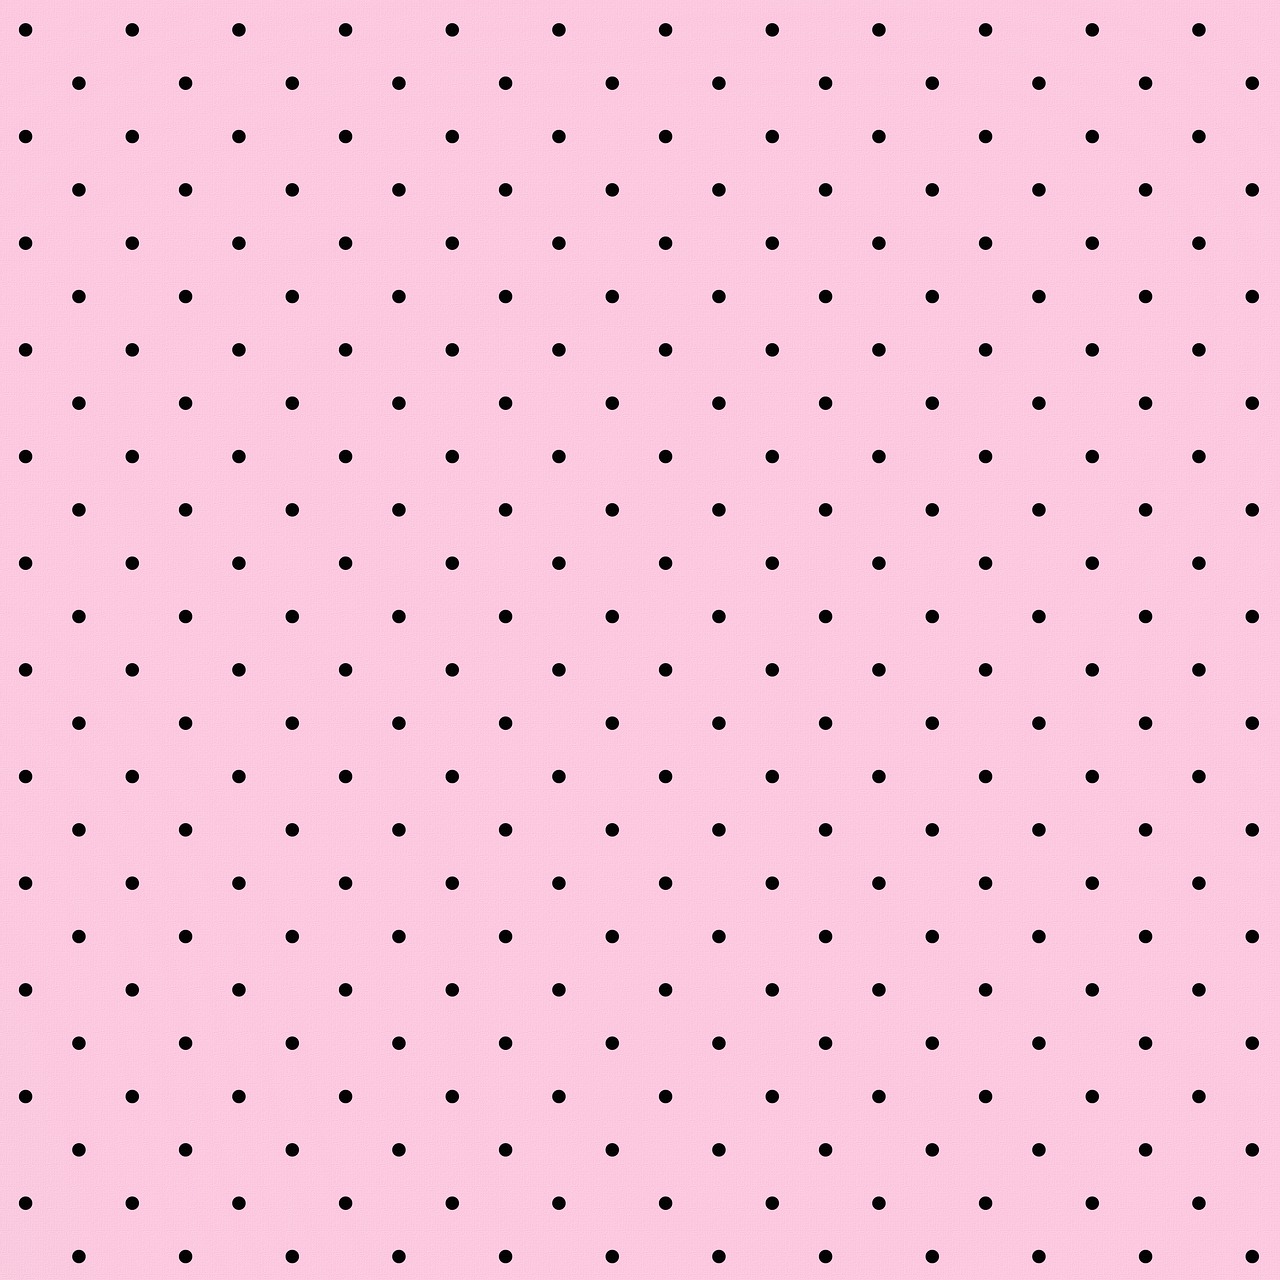 a pink background with small black dots, inspired by Peter Alexander Hay, tumblr, belle delphine, tileable, pastel goth aesthetic, magic eye